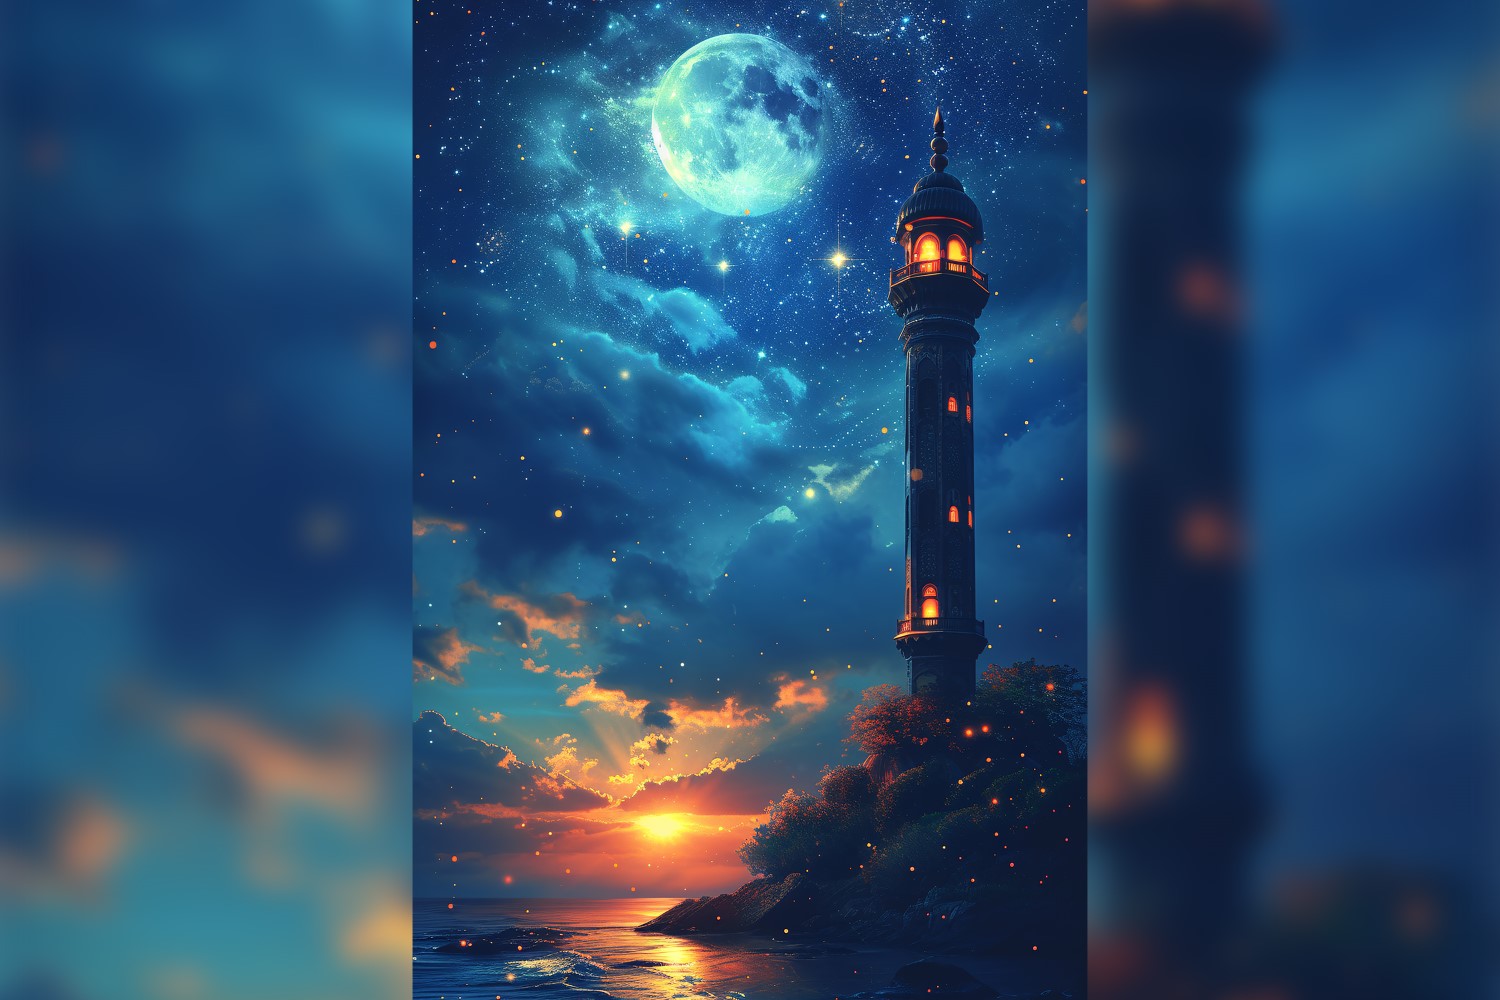 Ramadan Kareem greeting poster design with moon & mosque with sea view